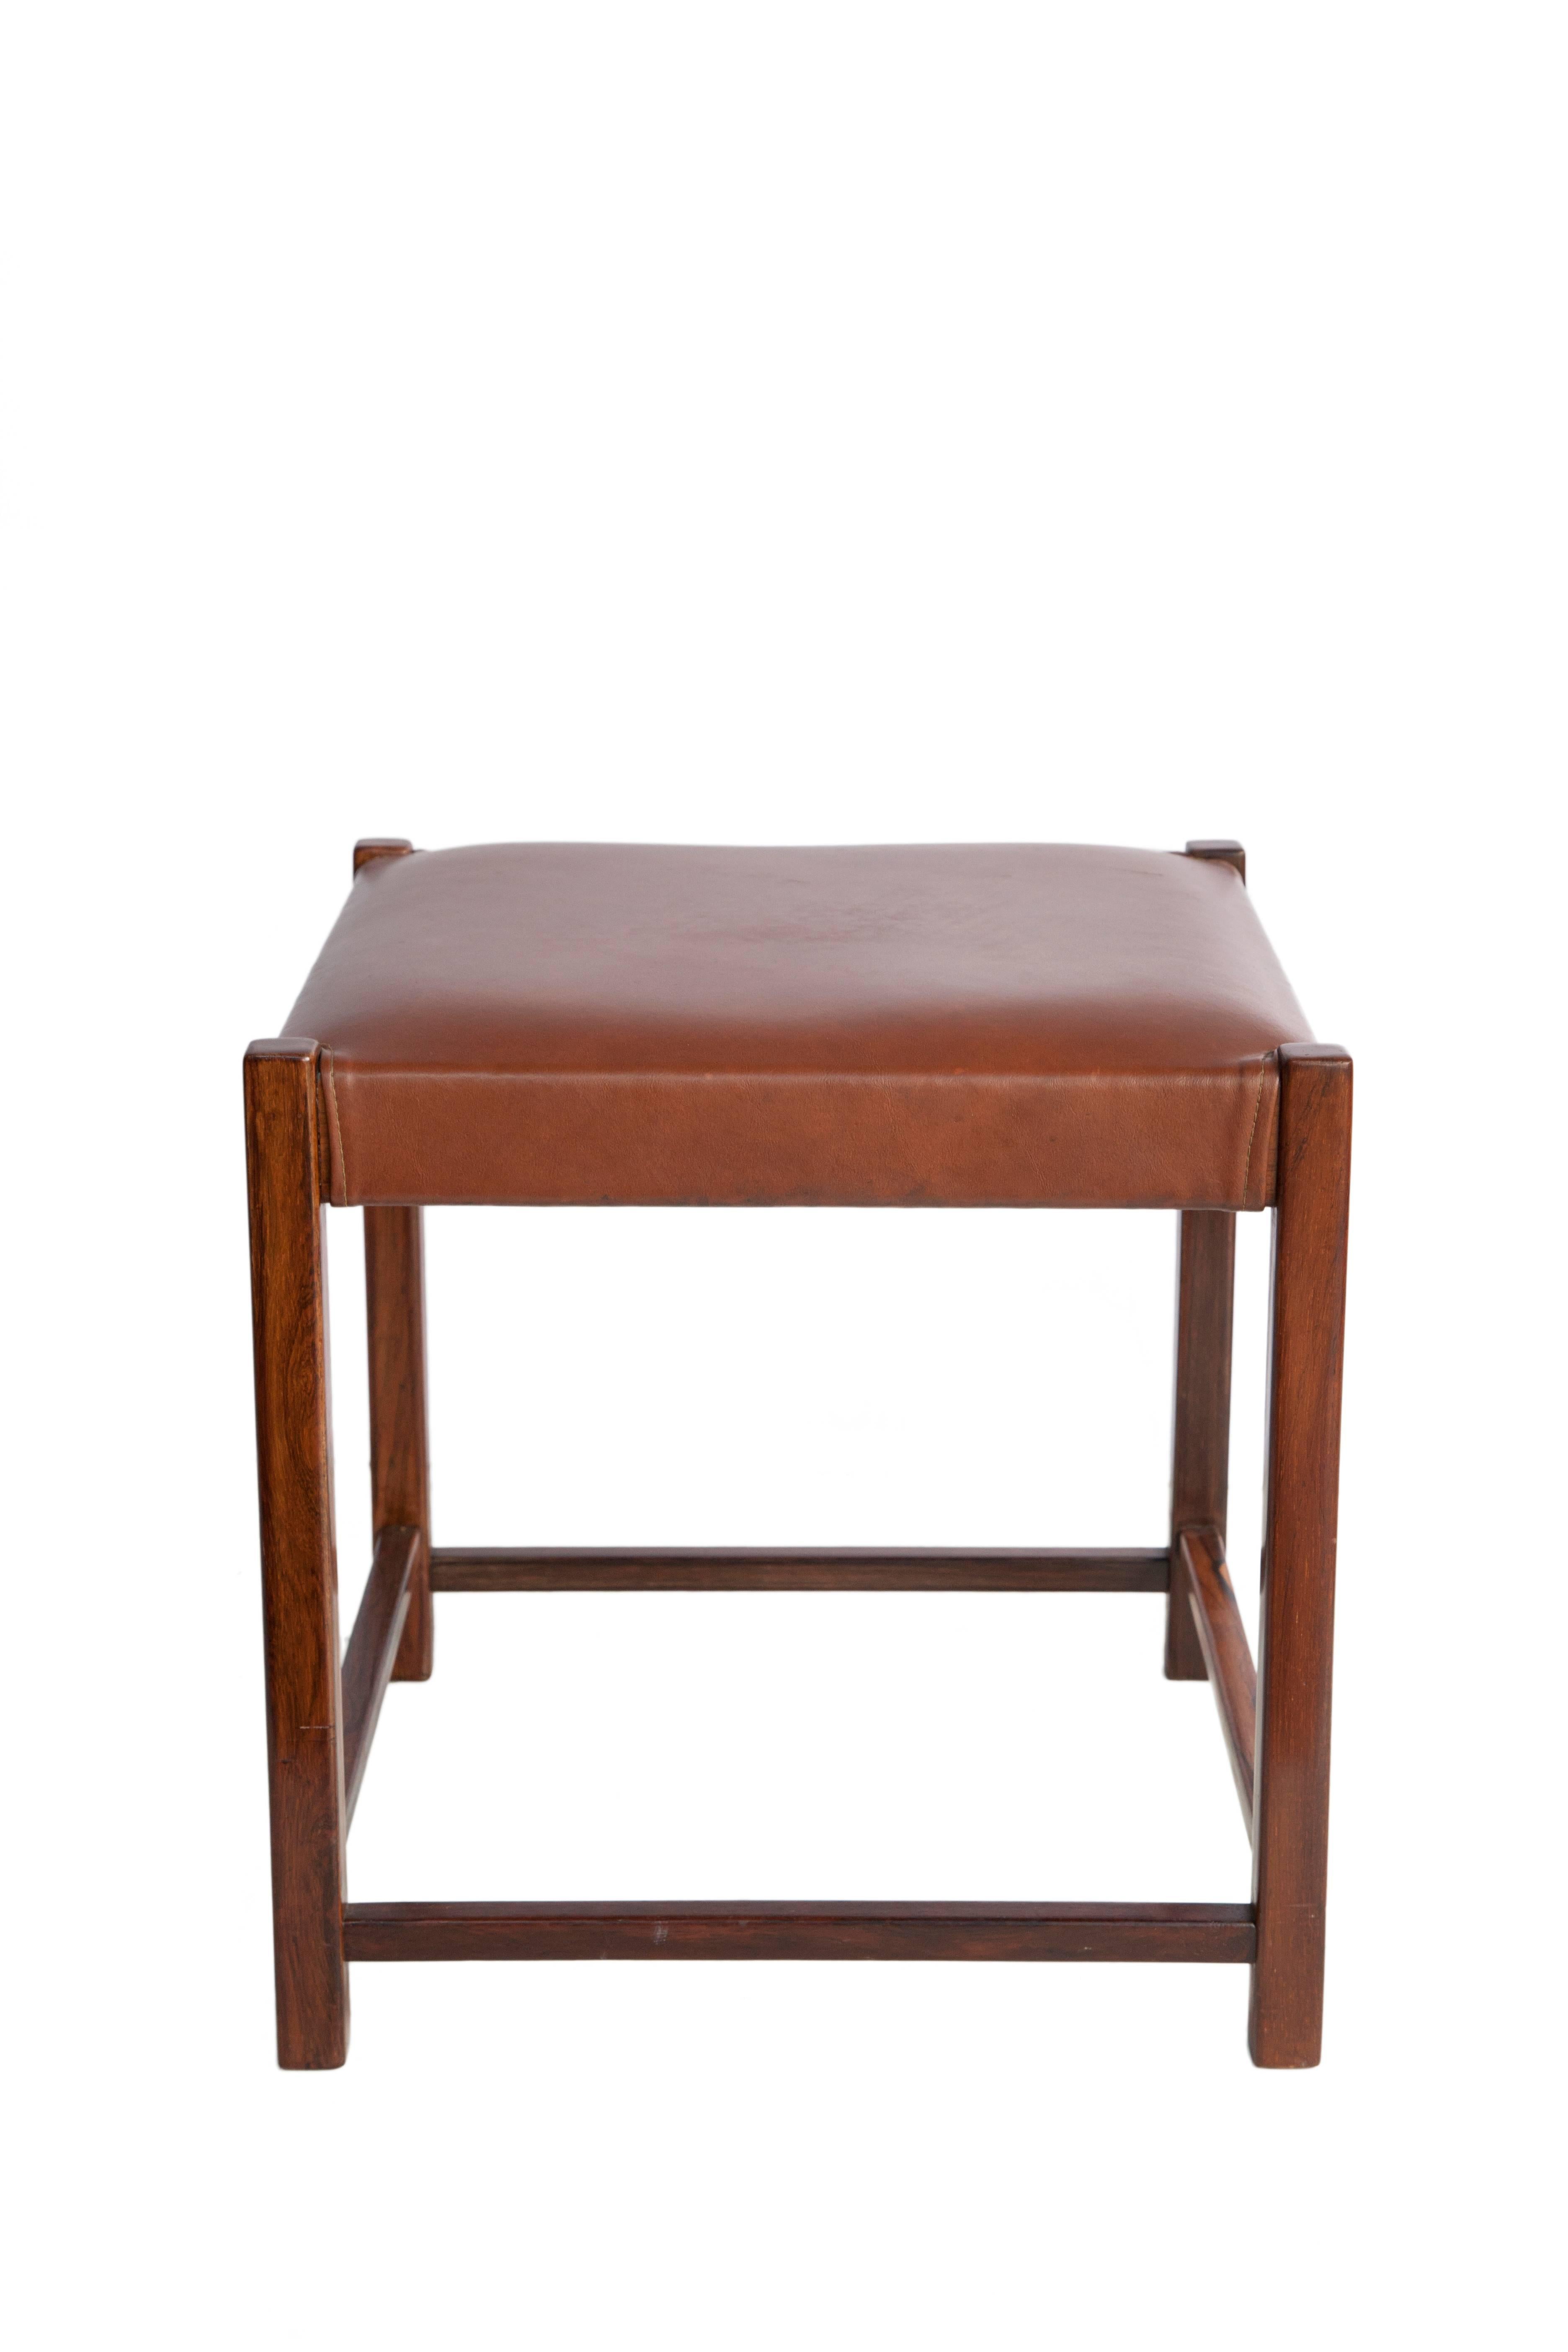 A Mid-Century Modern stool in Brazilian Jacaranda wood, with its original leather seat. Made in the 1960s in Brazil by Mobilinea. The piece is in great vintage condition, with wear appropriate to use and age. Original Mobilinea seal underneath the